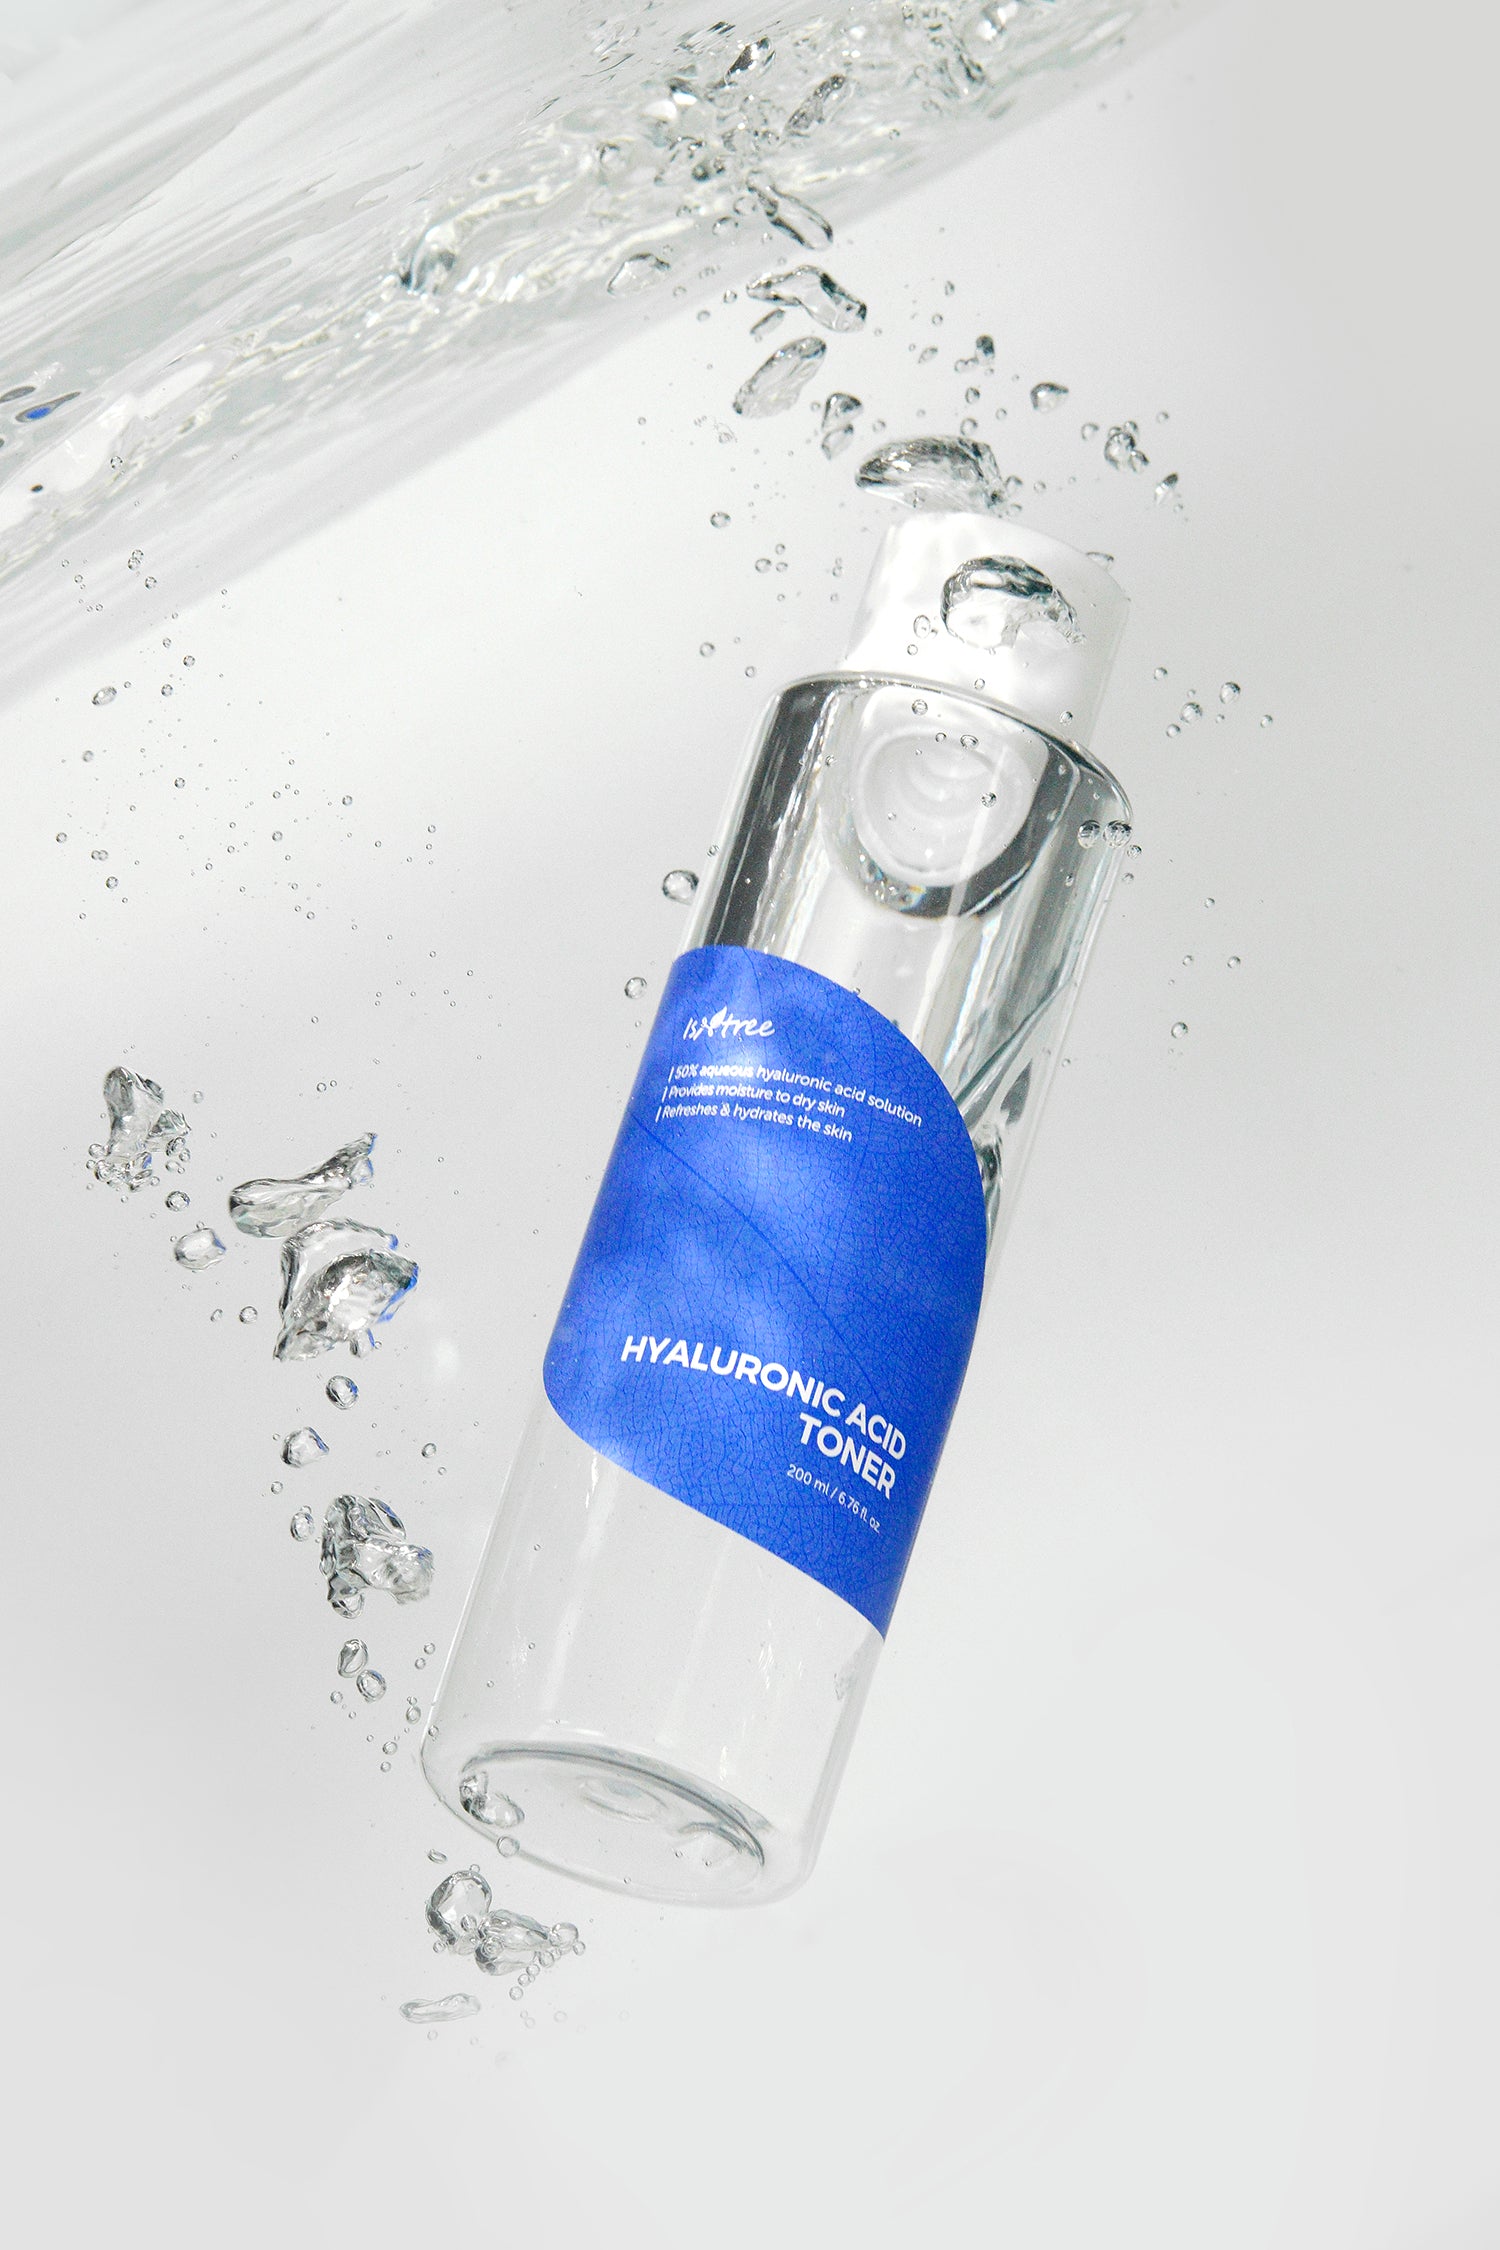 [ ISNTREE ] Hyaluronic Acid Face Toner Hydrating and Refreshing, 200ml / 6.76 fl.oz